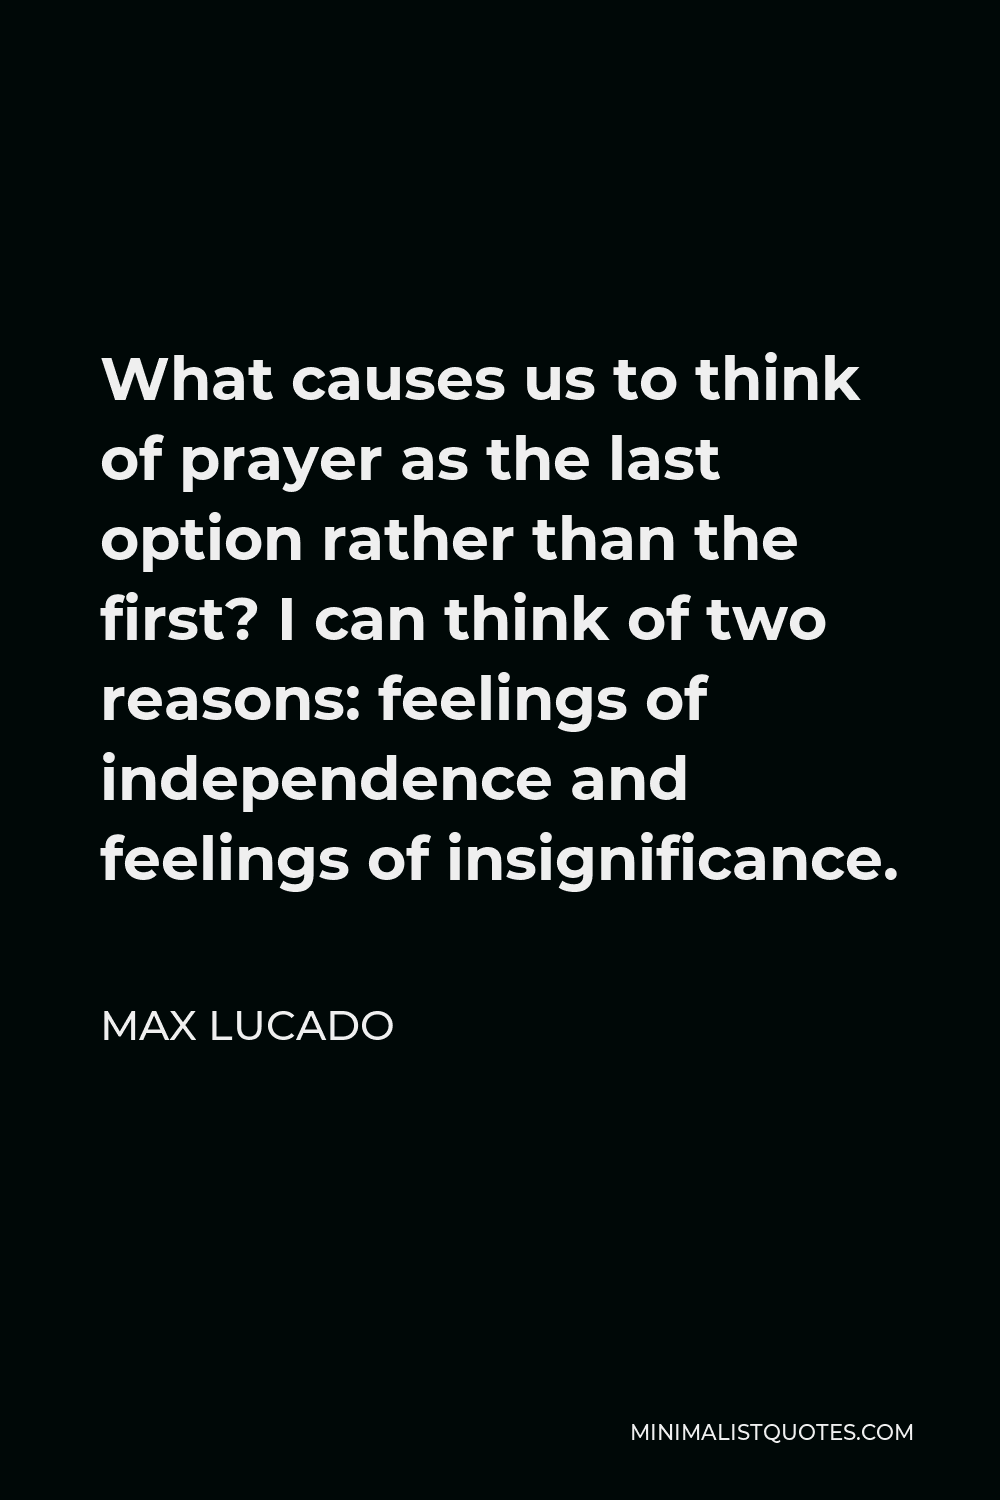 Max Lucado Quote - What causes us to think of prayer as the last option rather than the first? I can think of two reasons: feelings of independence and feelings of insignificance.